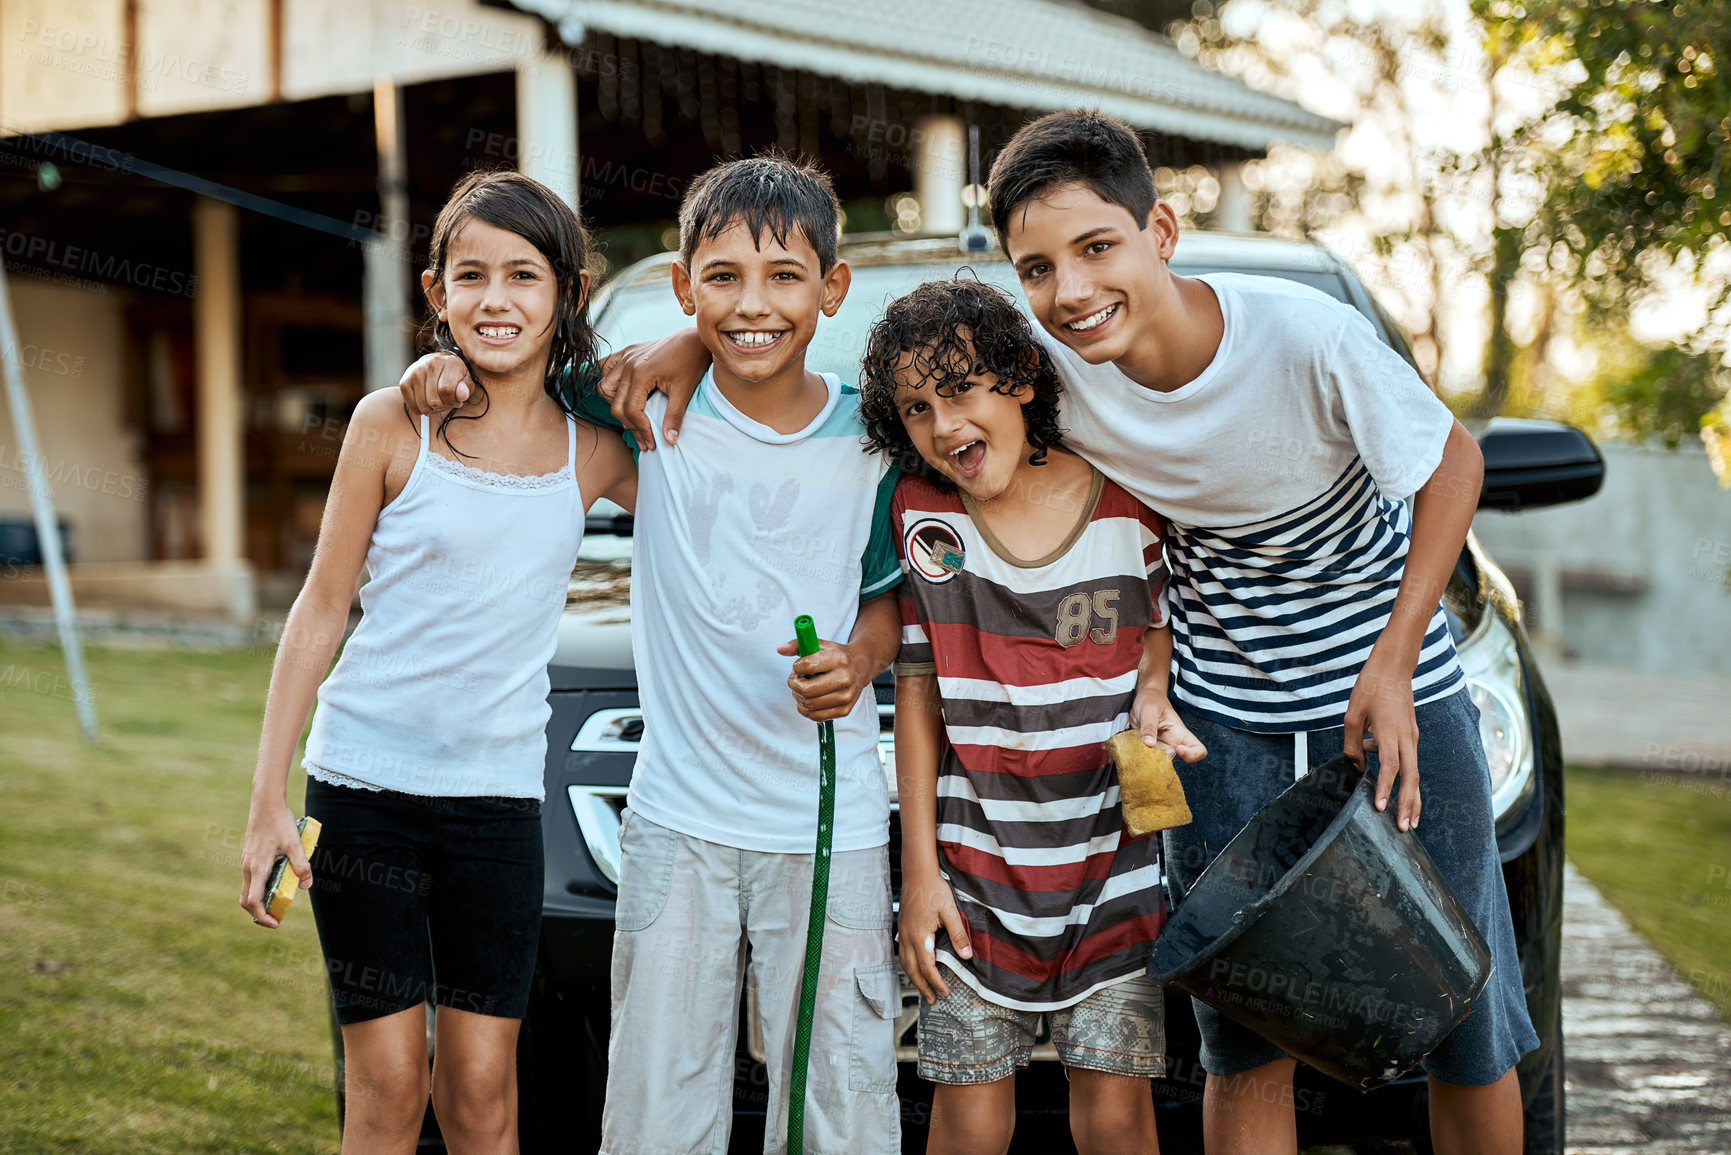 Buy stock photo Portrait of a group of young kids standing together and about to wash their parent's car outside during the day